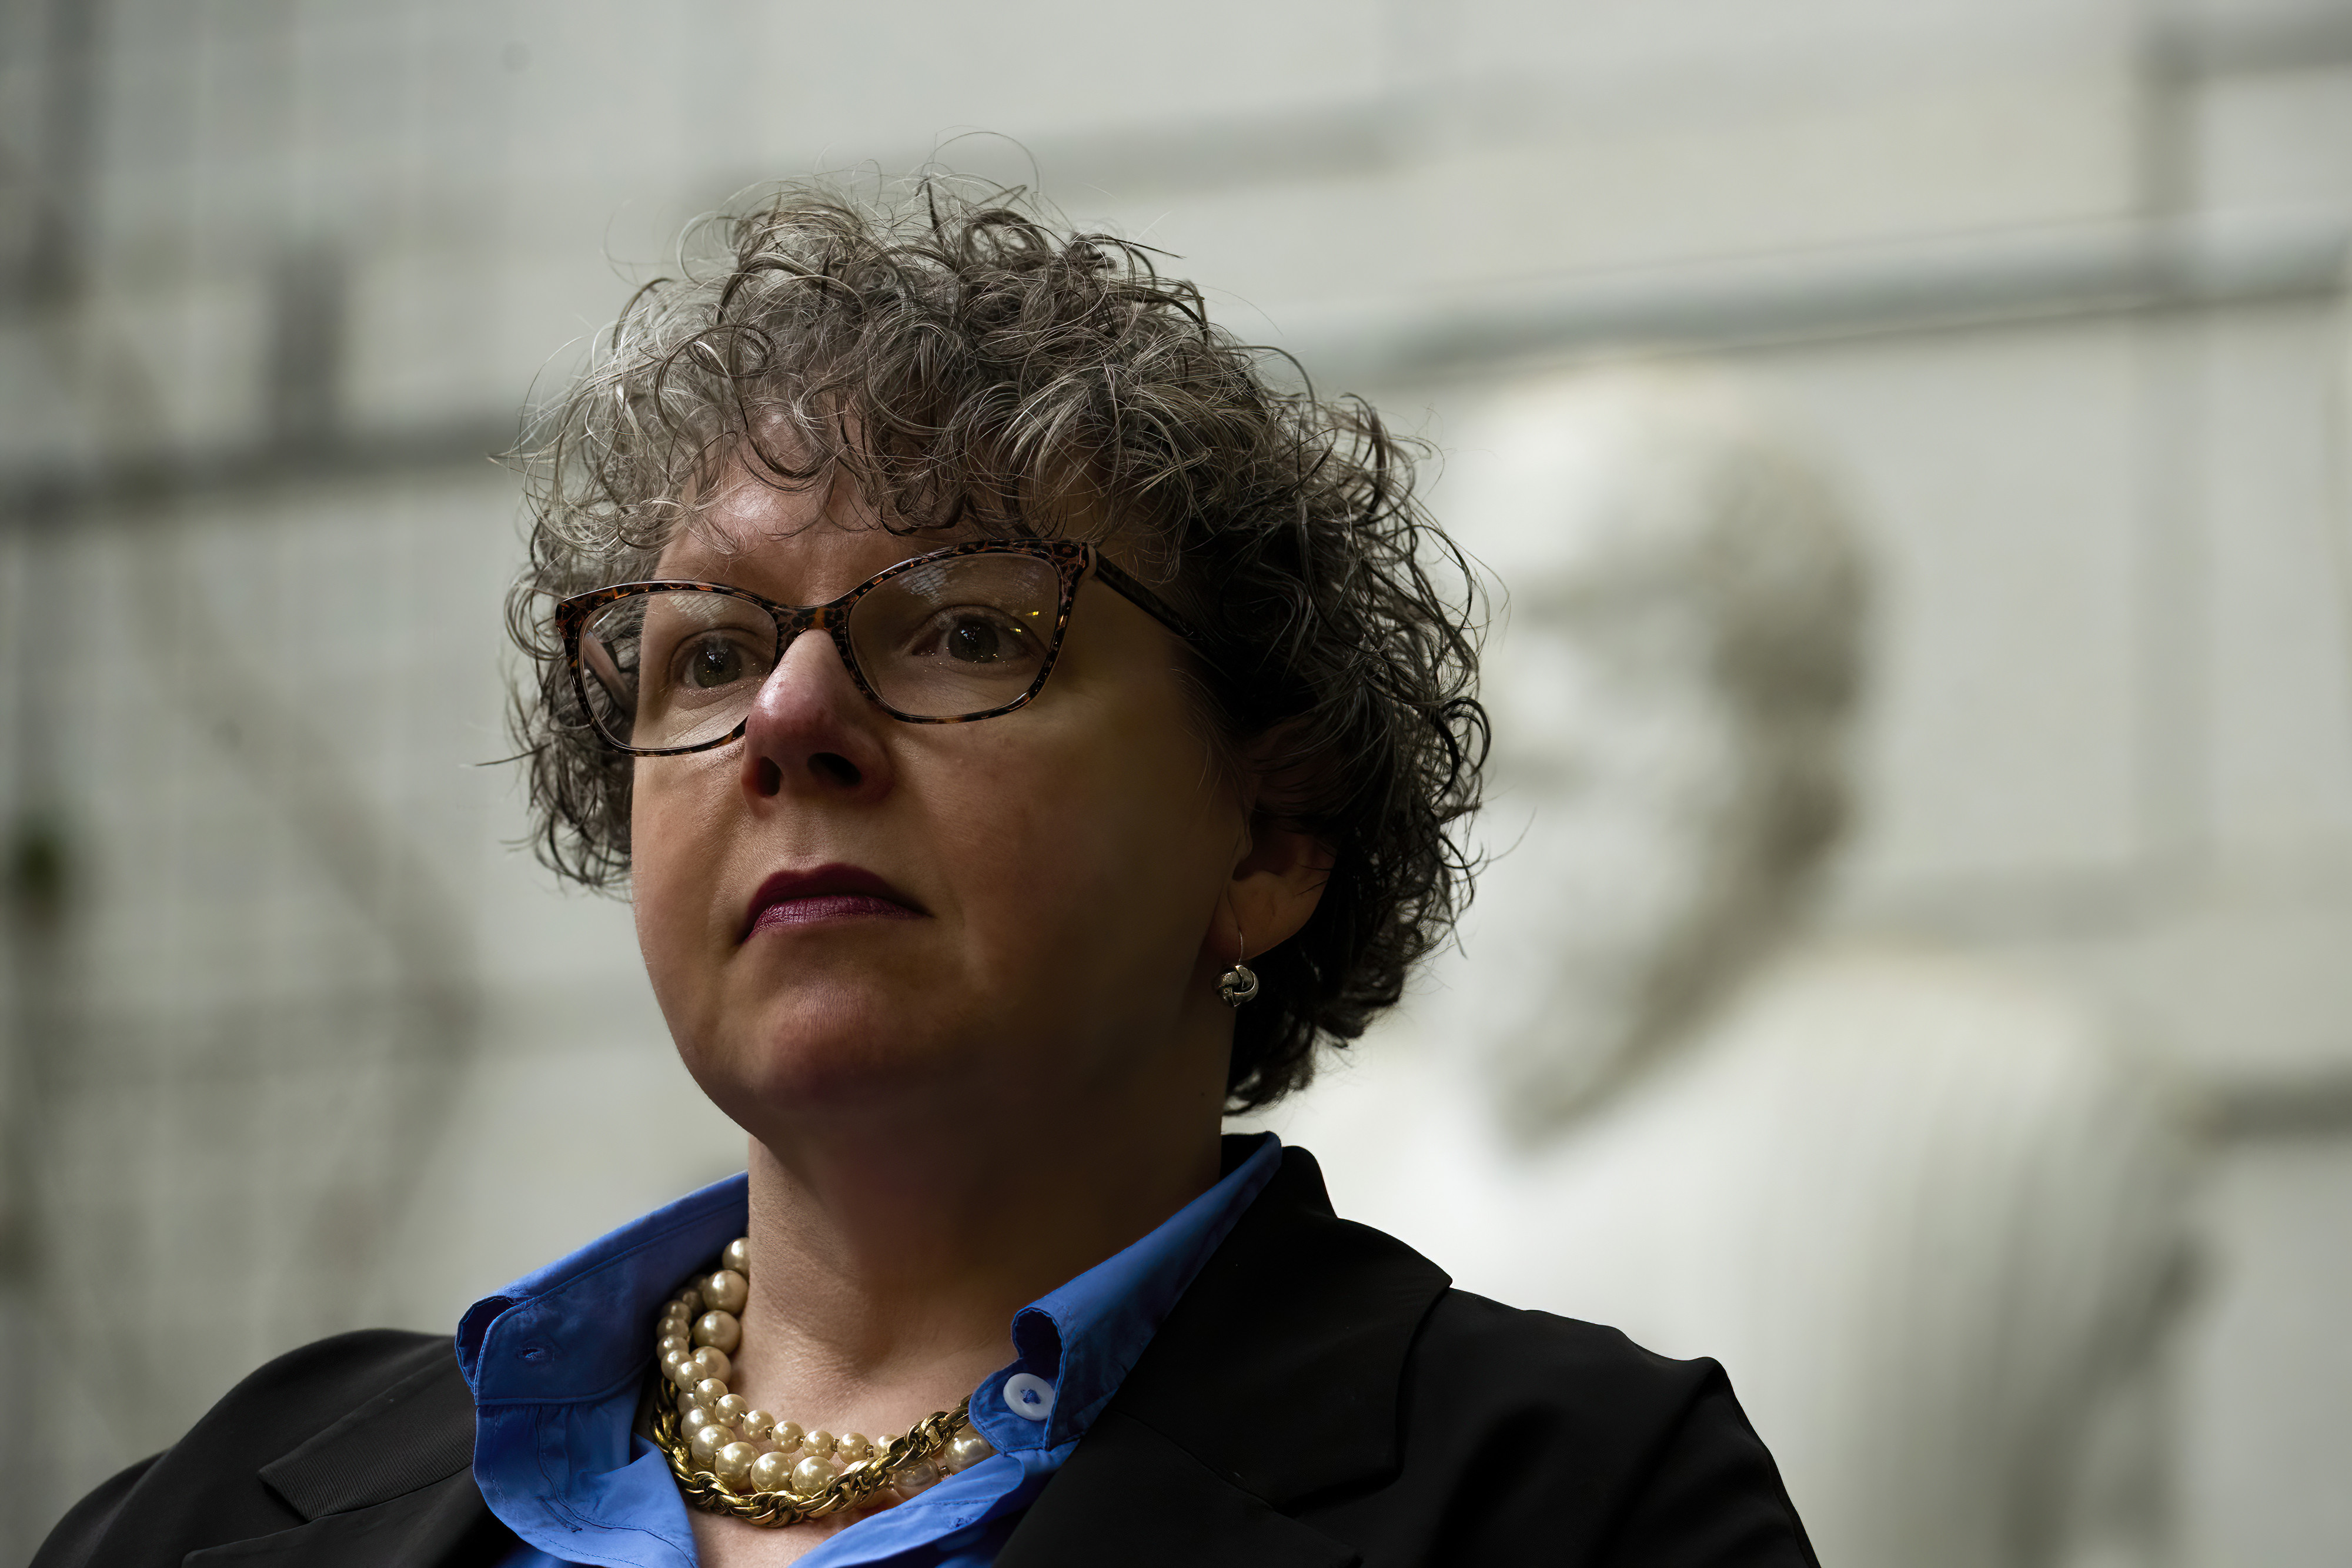 Sarah Elaine Eaton - Short curly hair, glasses, wearing a necklace, a blue shirt, and a black jacket. The white and background is blurred.